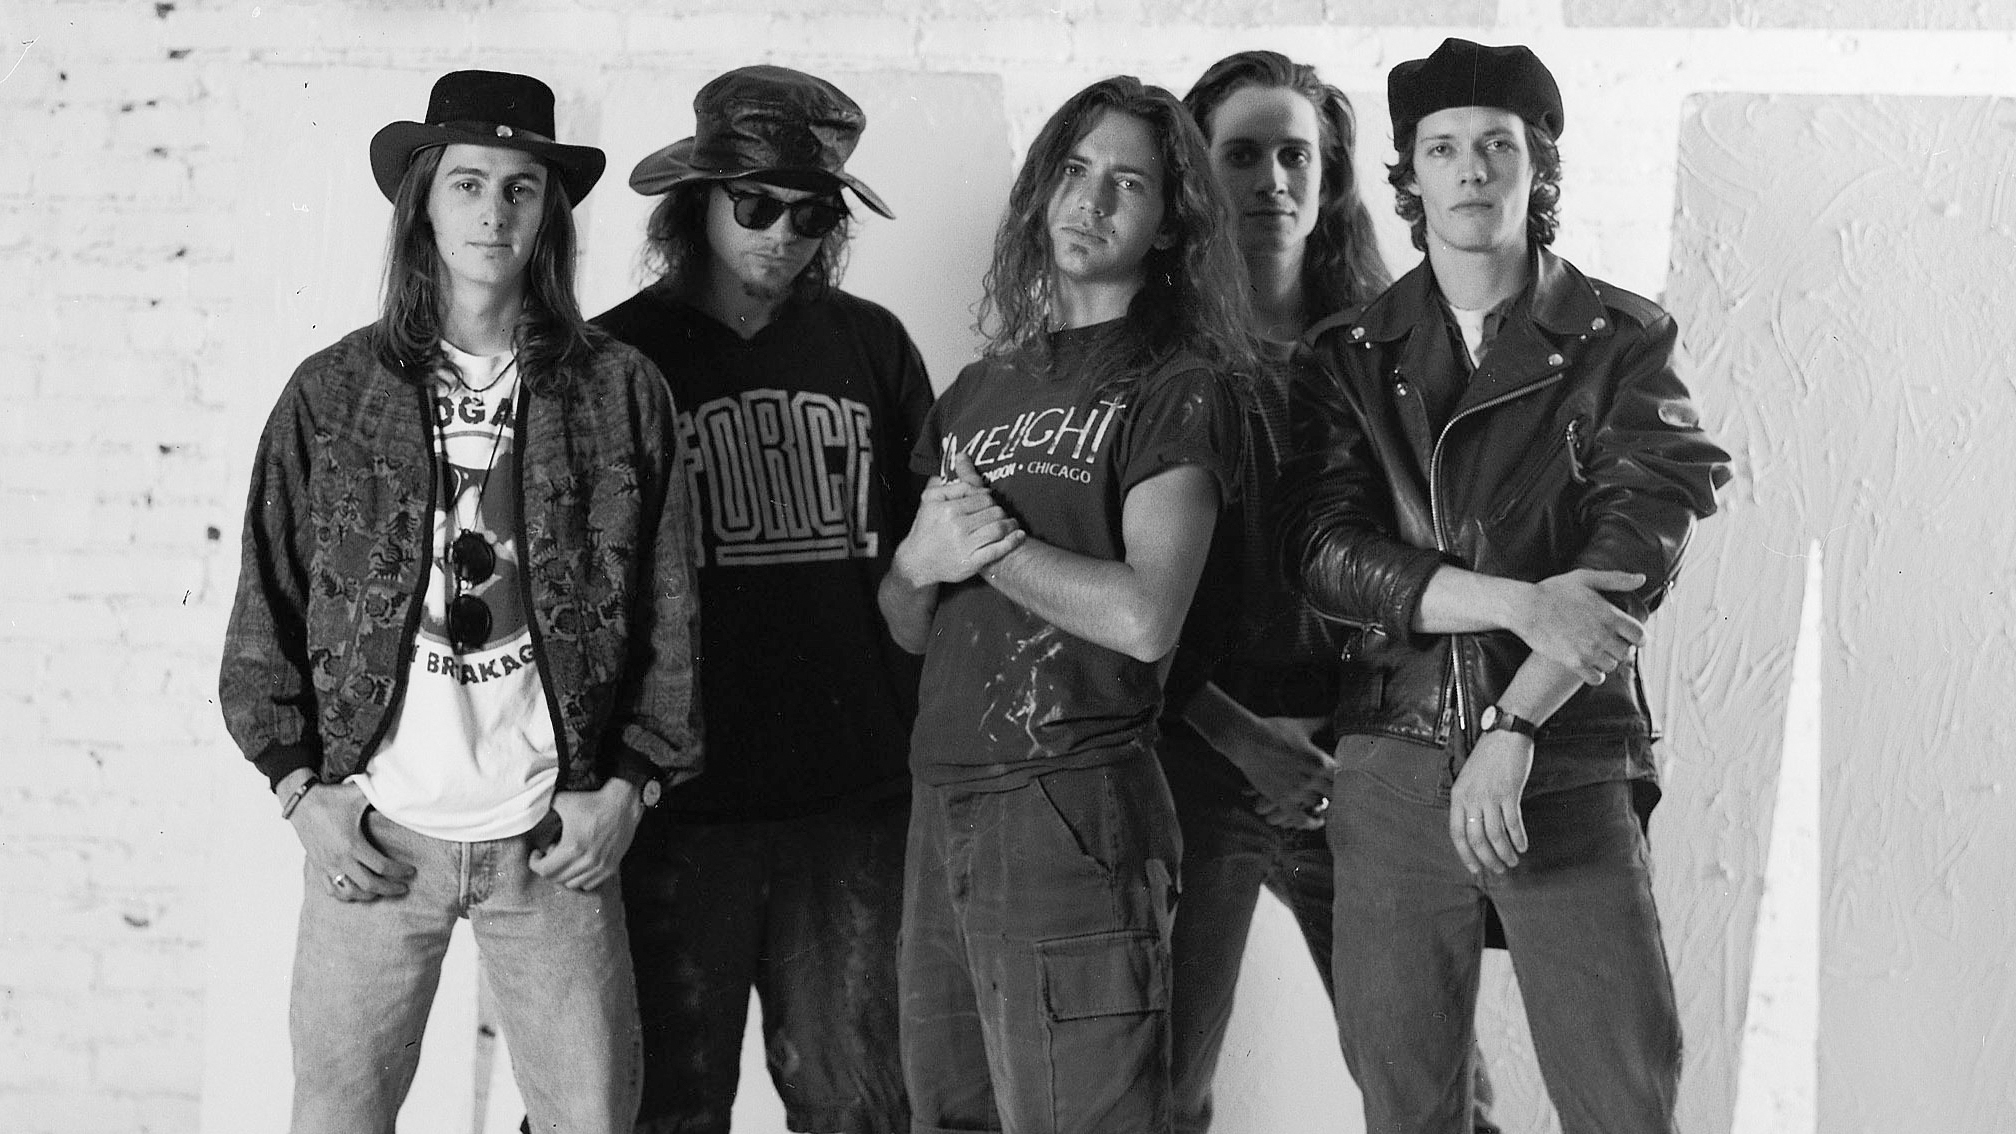 Future grunge-rock icons of Pearl Jam perform debut gig as Mookie